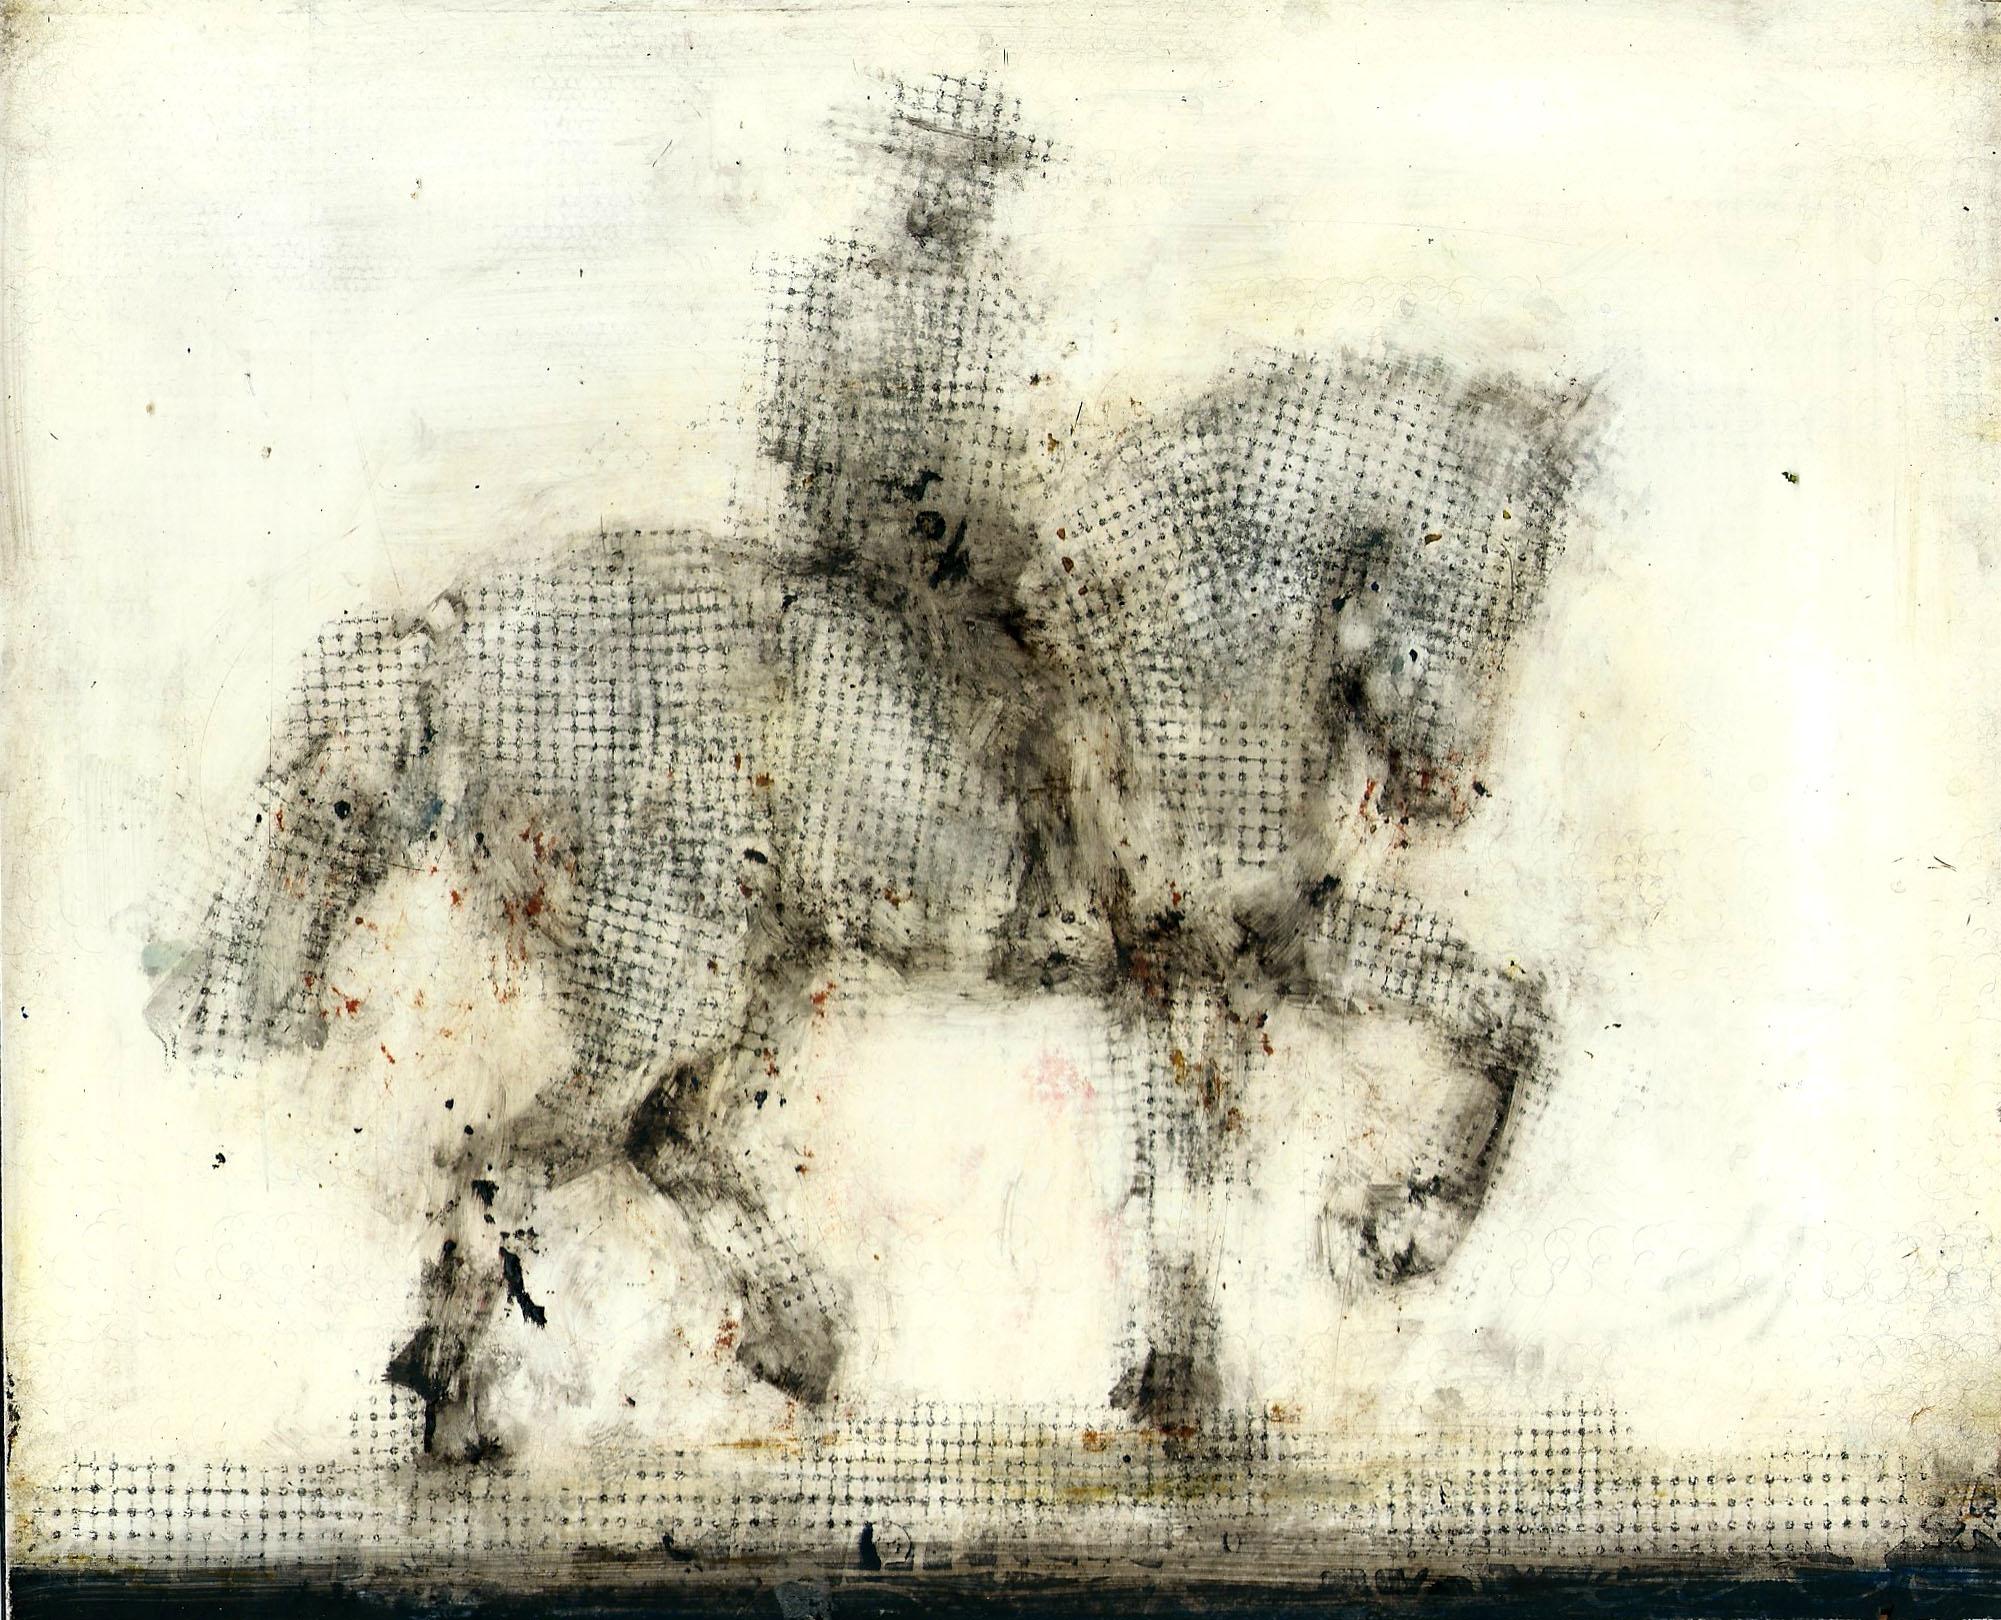 Alicia Rothman Animal Painting - Horse and Rider, mixed media, oil on panel, 10 x 8 inches. Dotted display